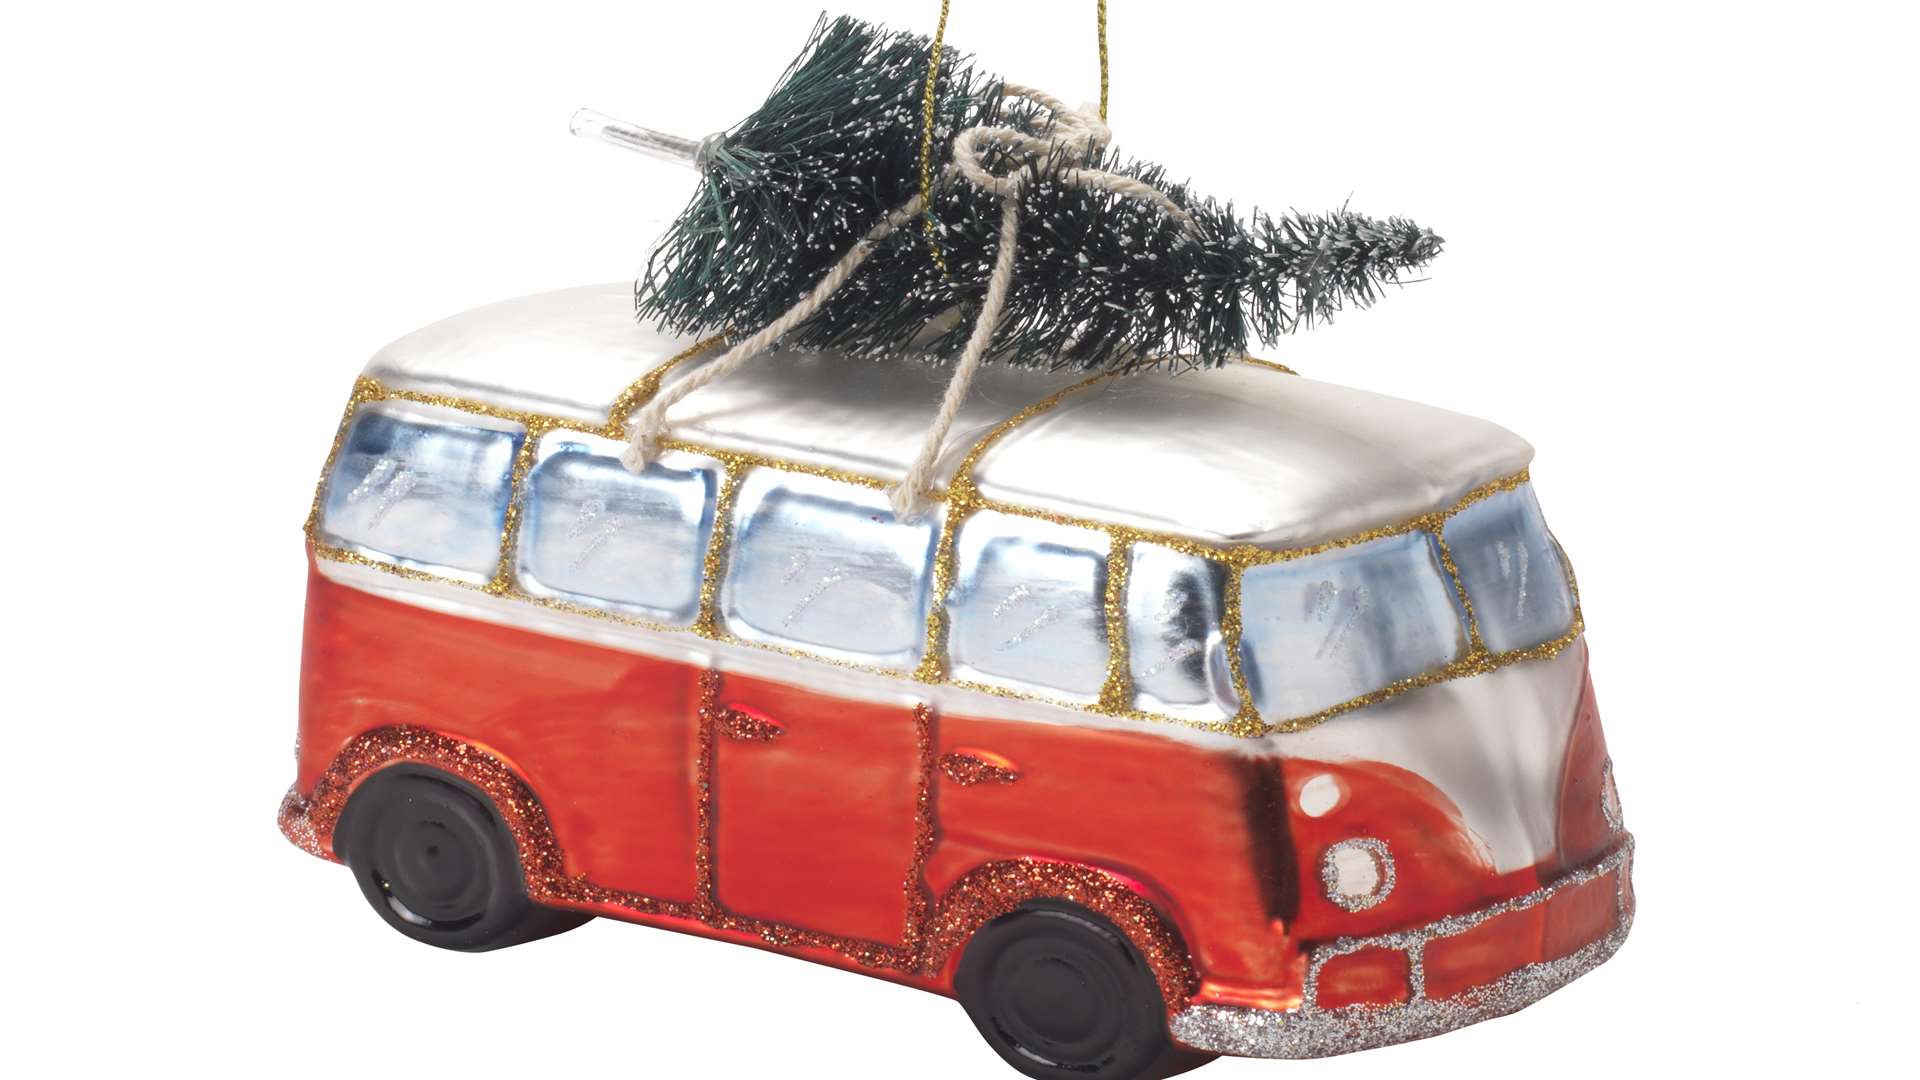 This super cool glass campervan will look great on any Christmas tree. It costs £12 at House of Fraser.